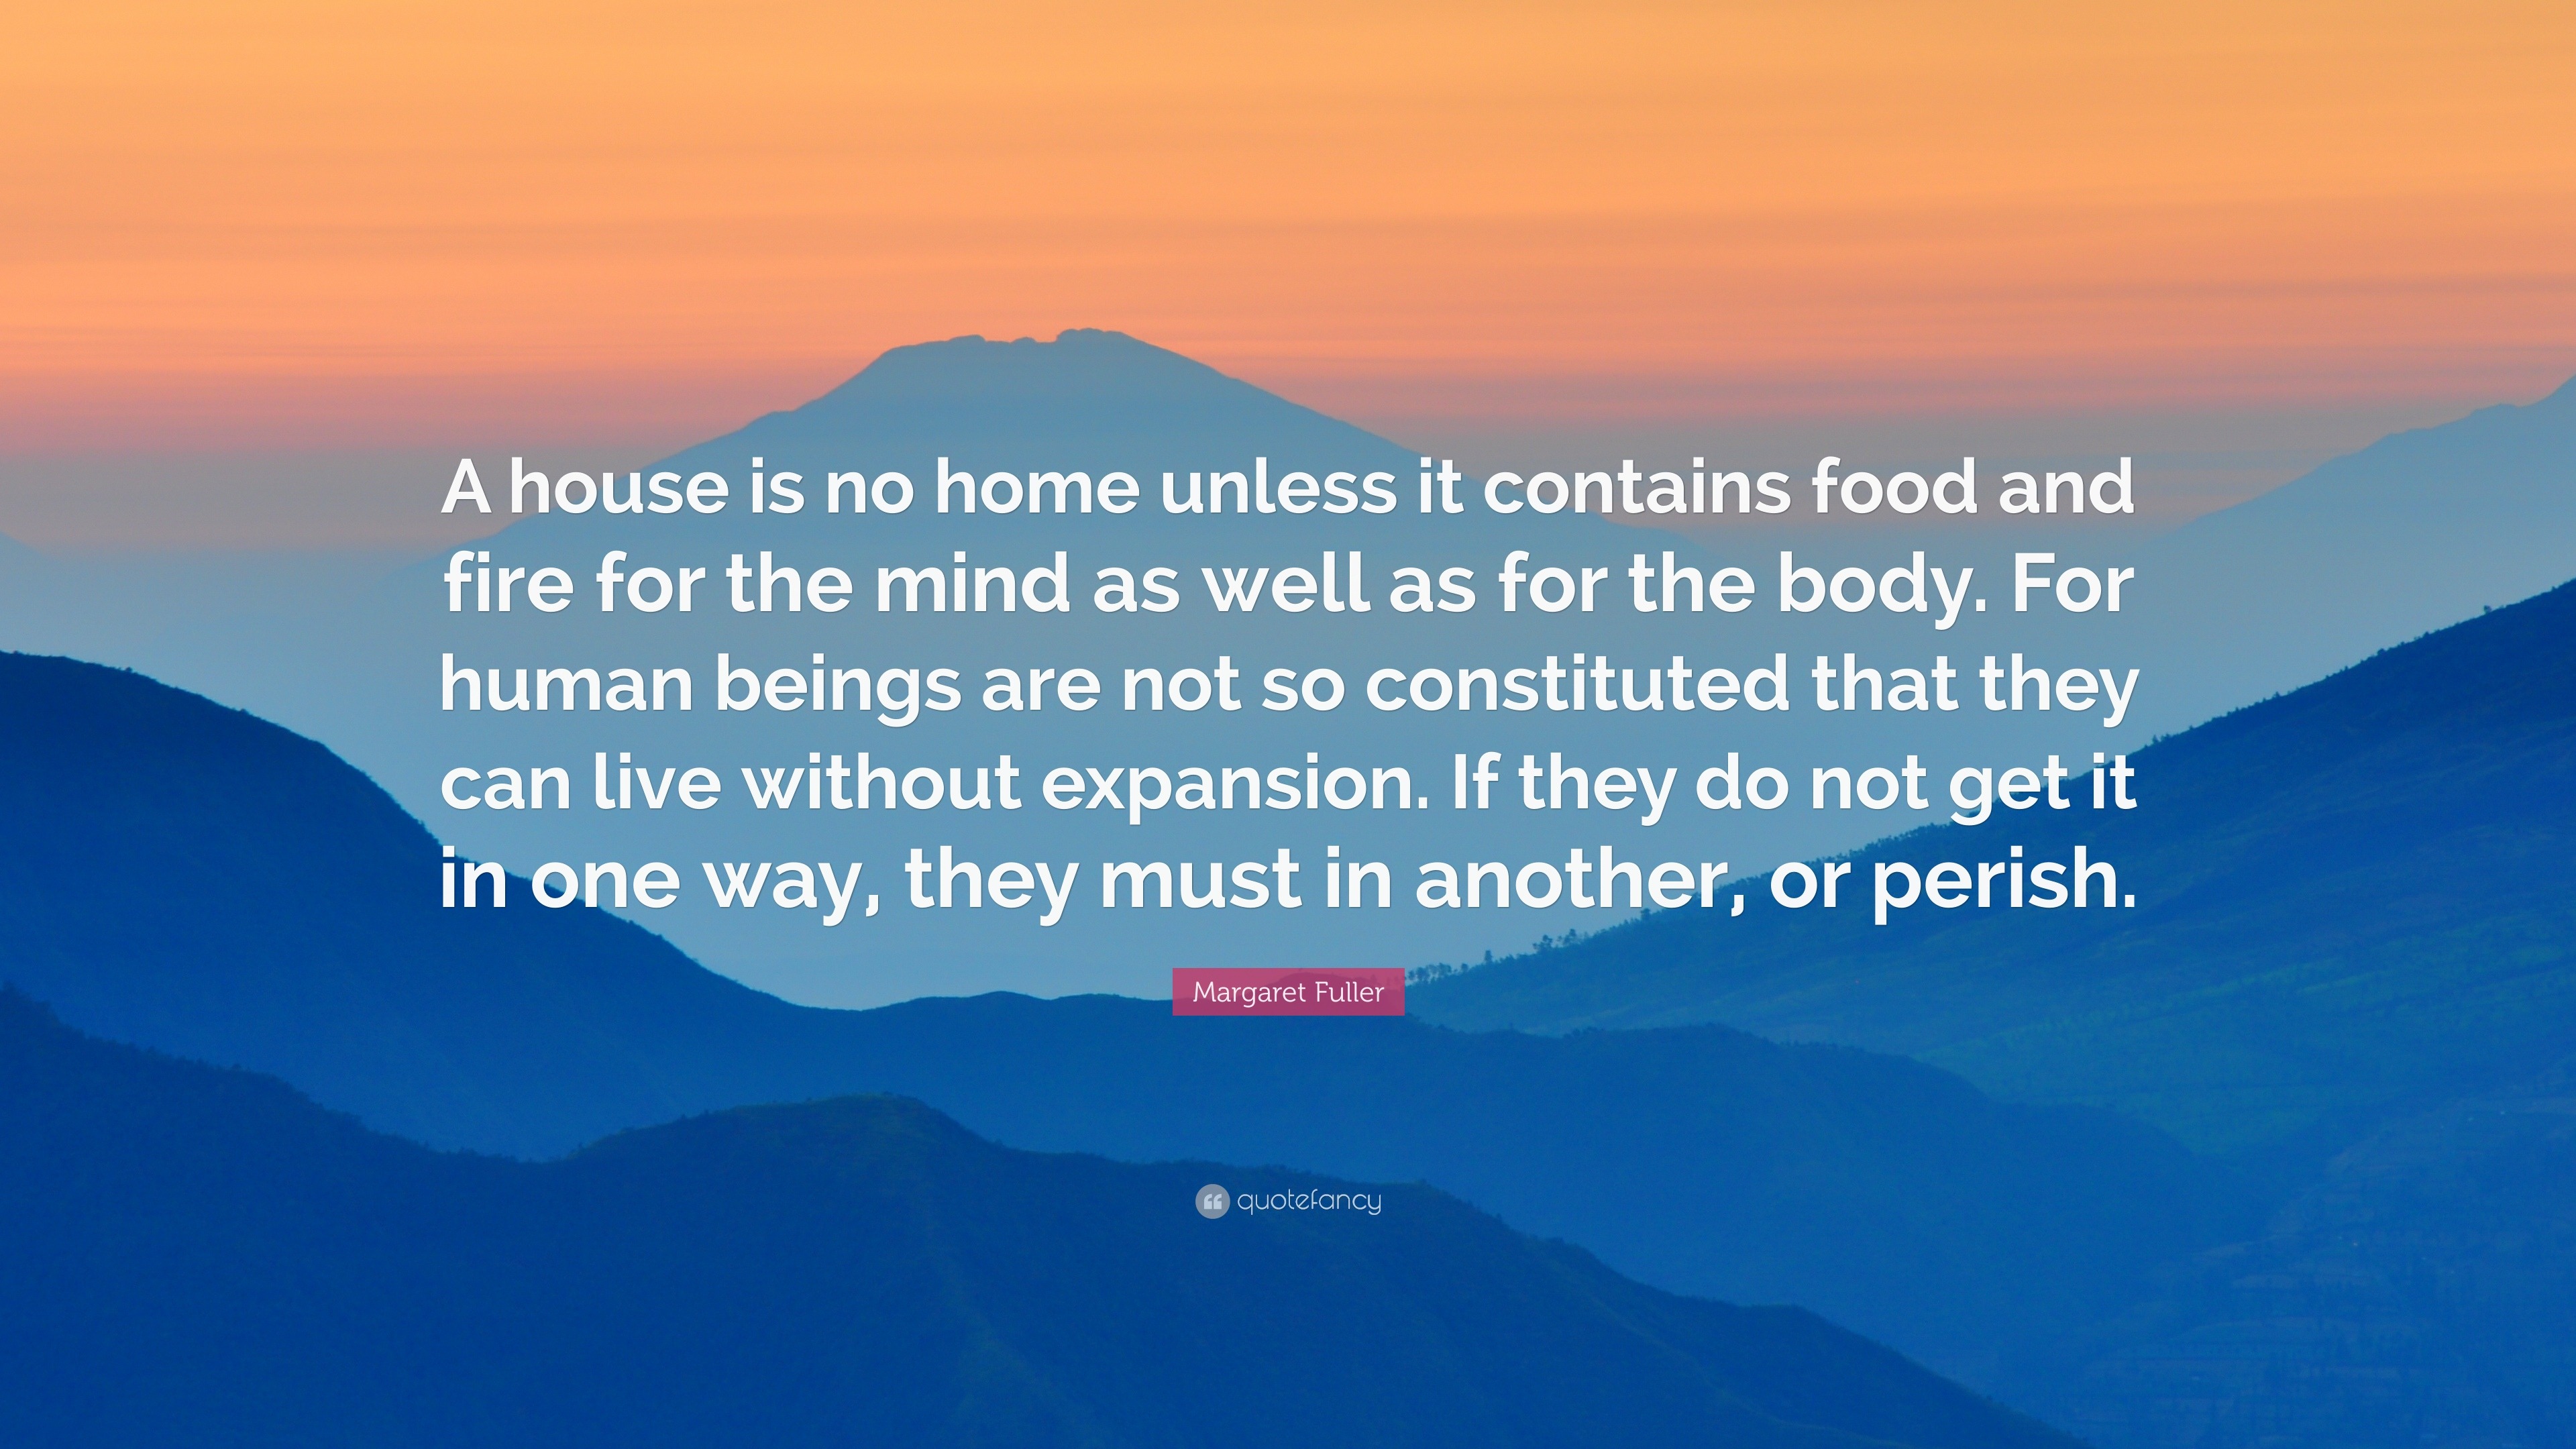 for human beings are not so constituted that they can live